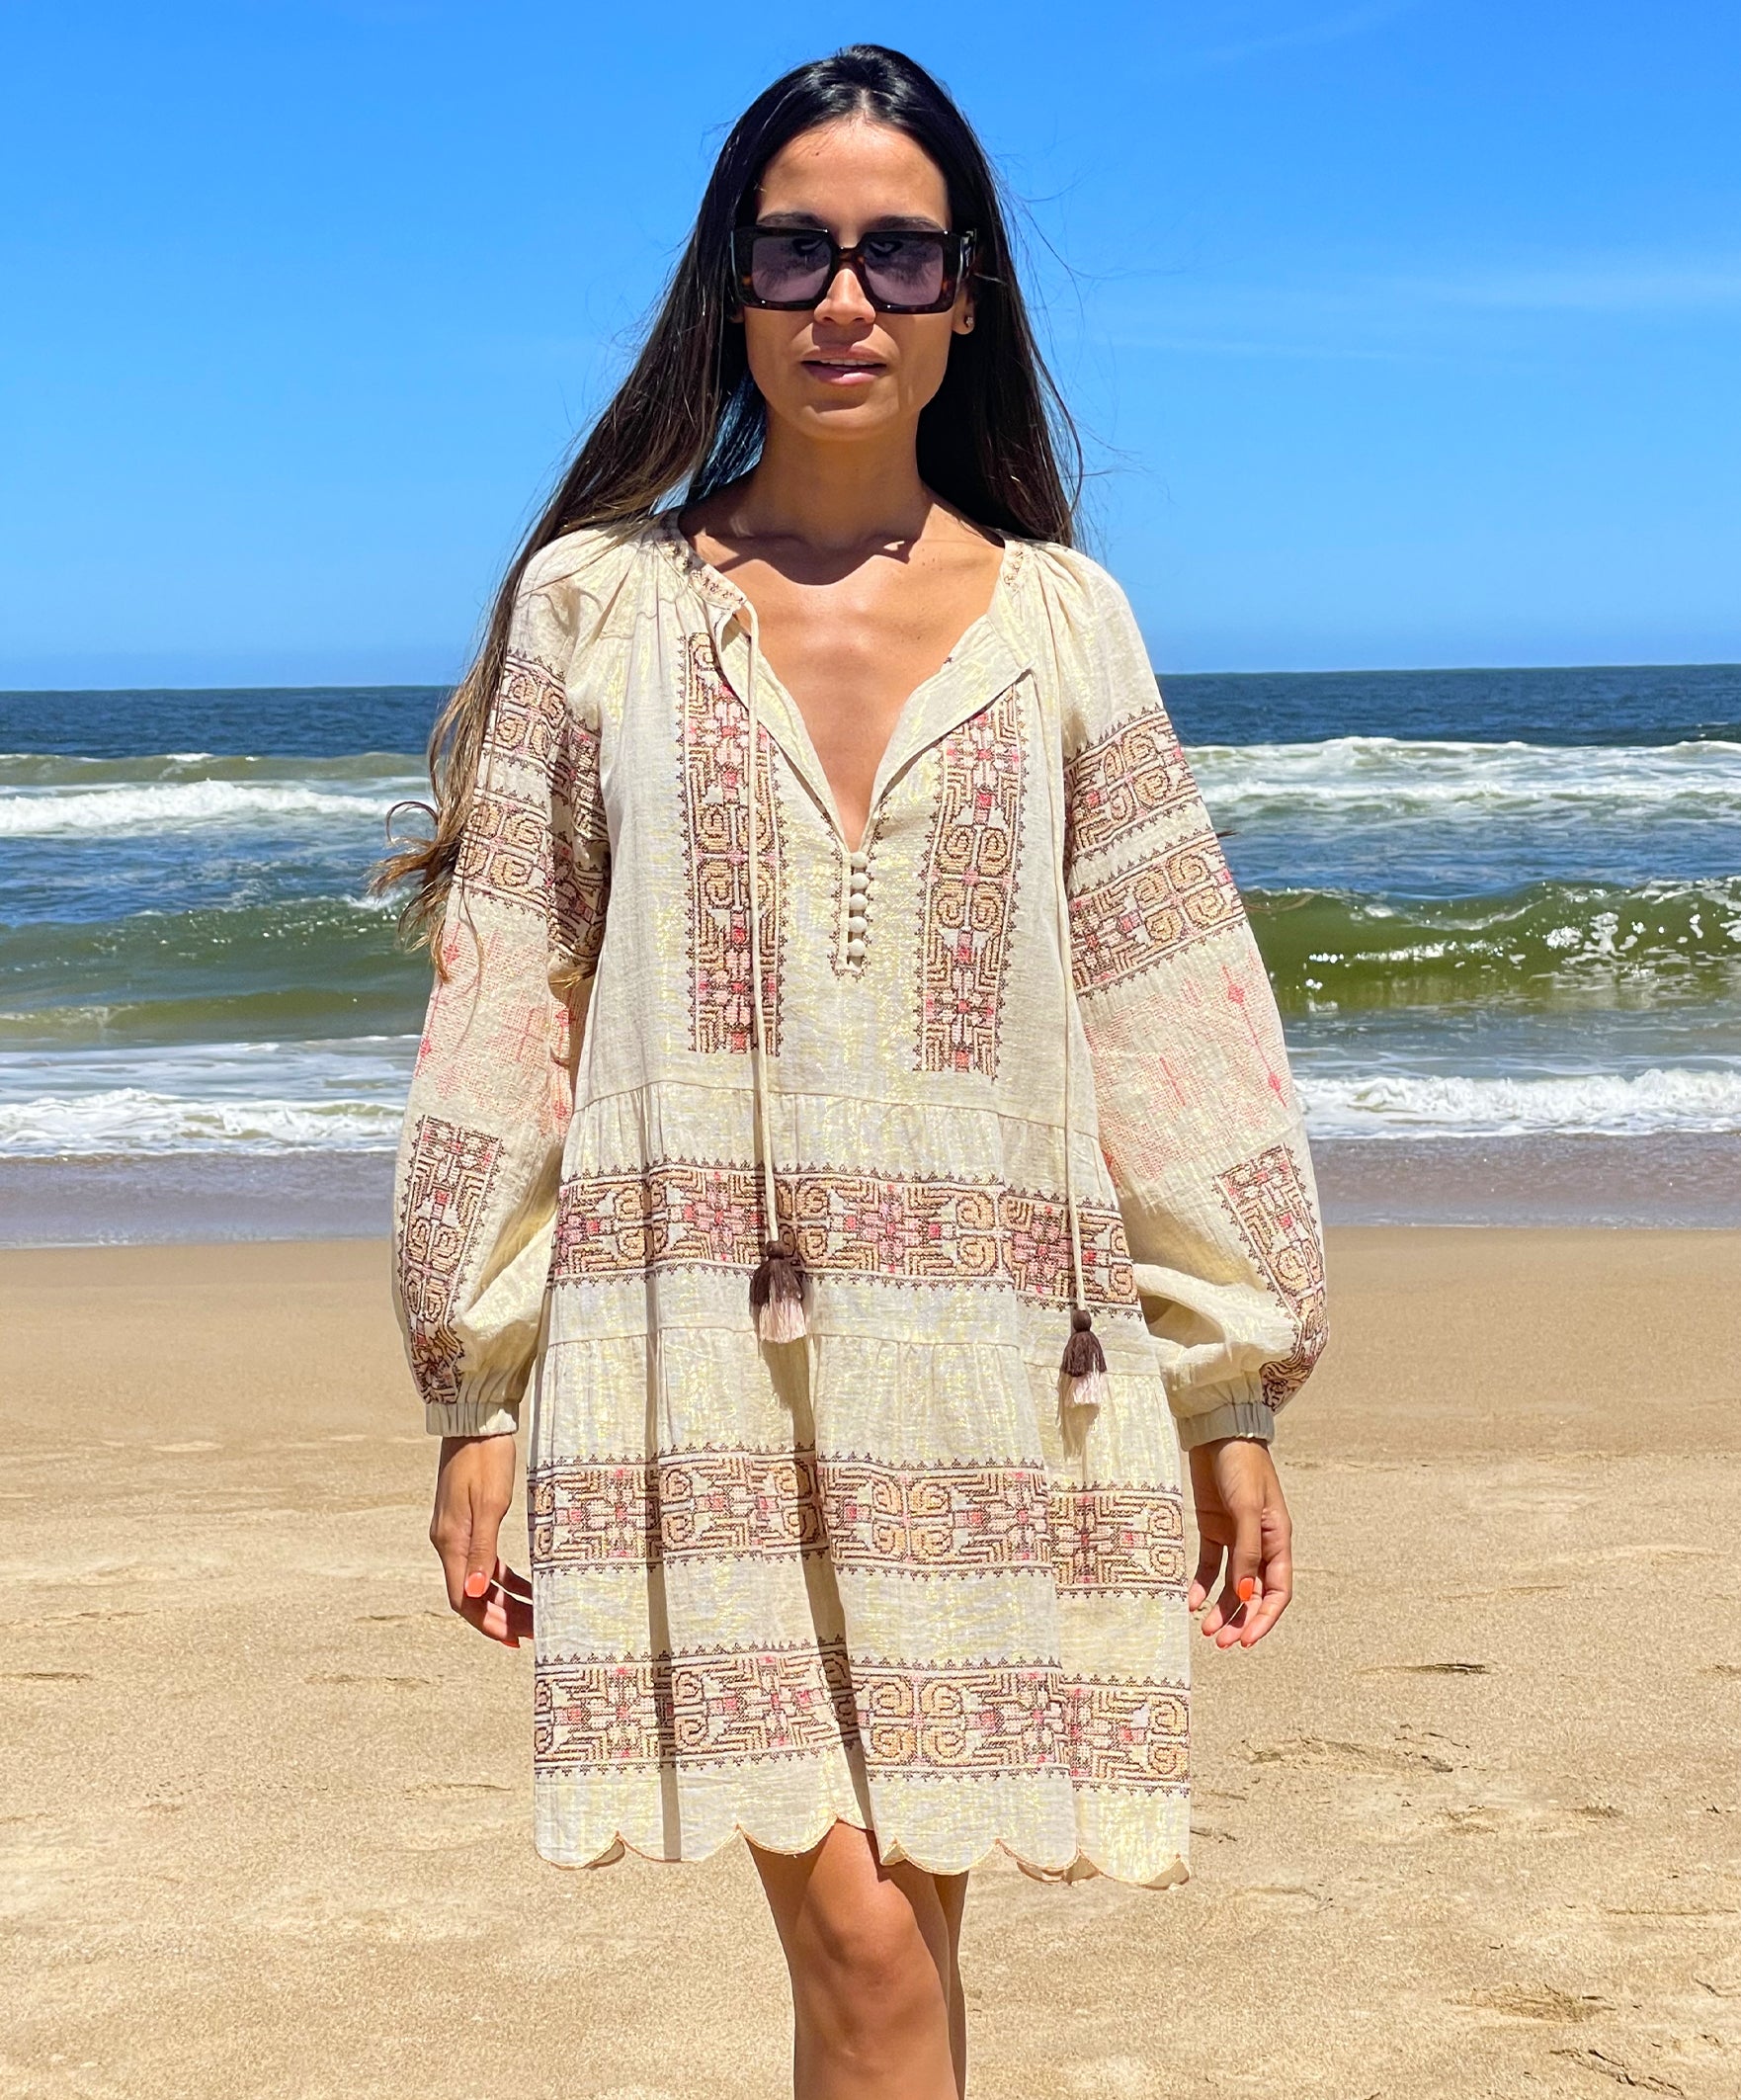 A model on a beach wearing the Rose and Rose Ravello gold lurex embroidered dress.